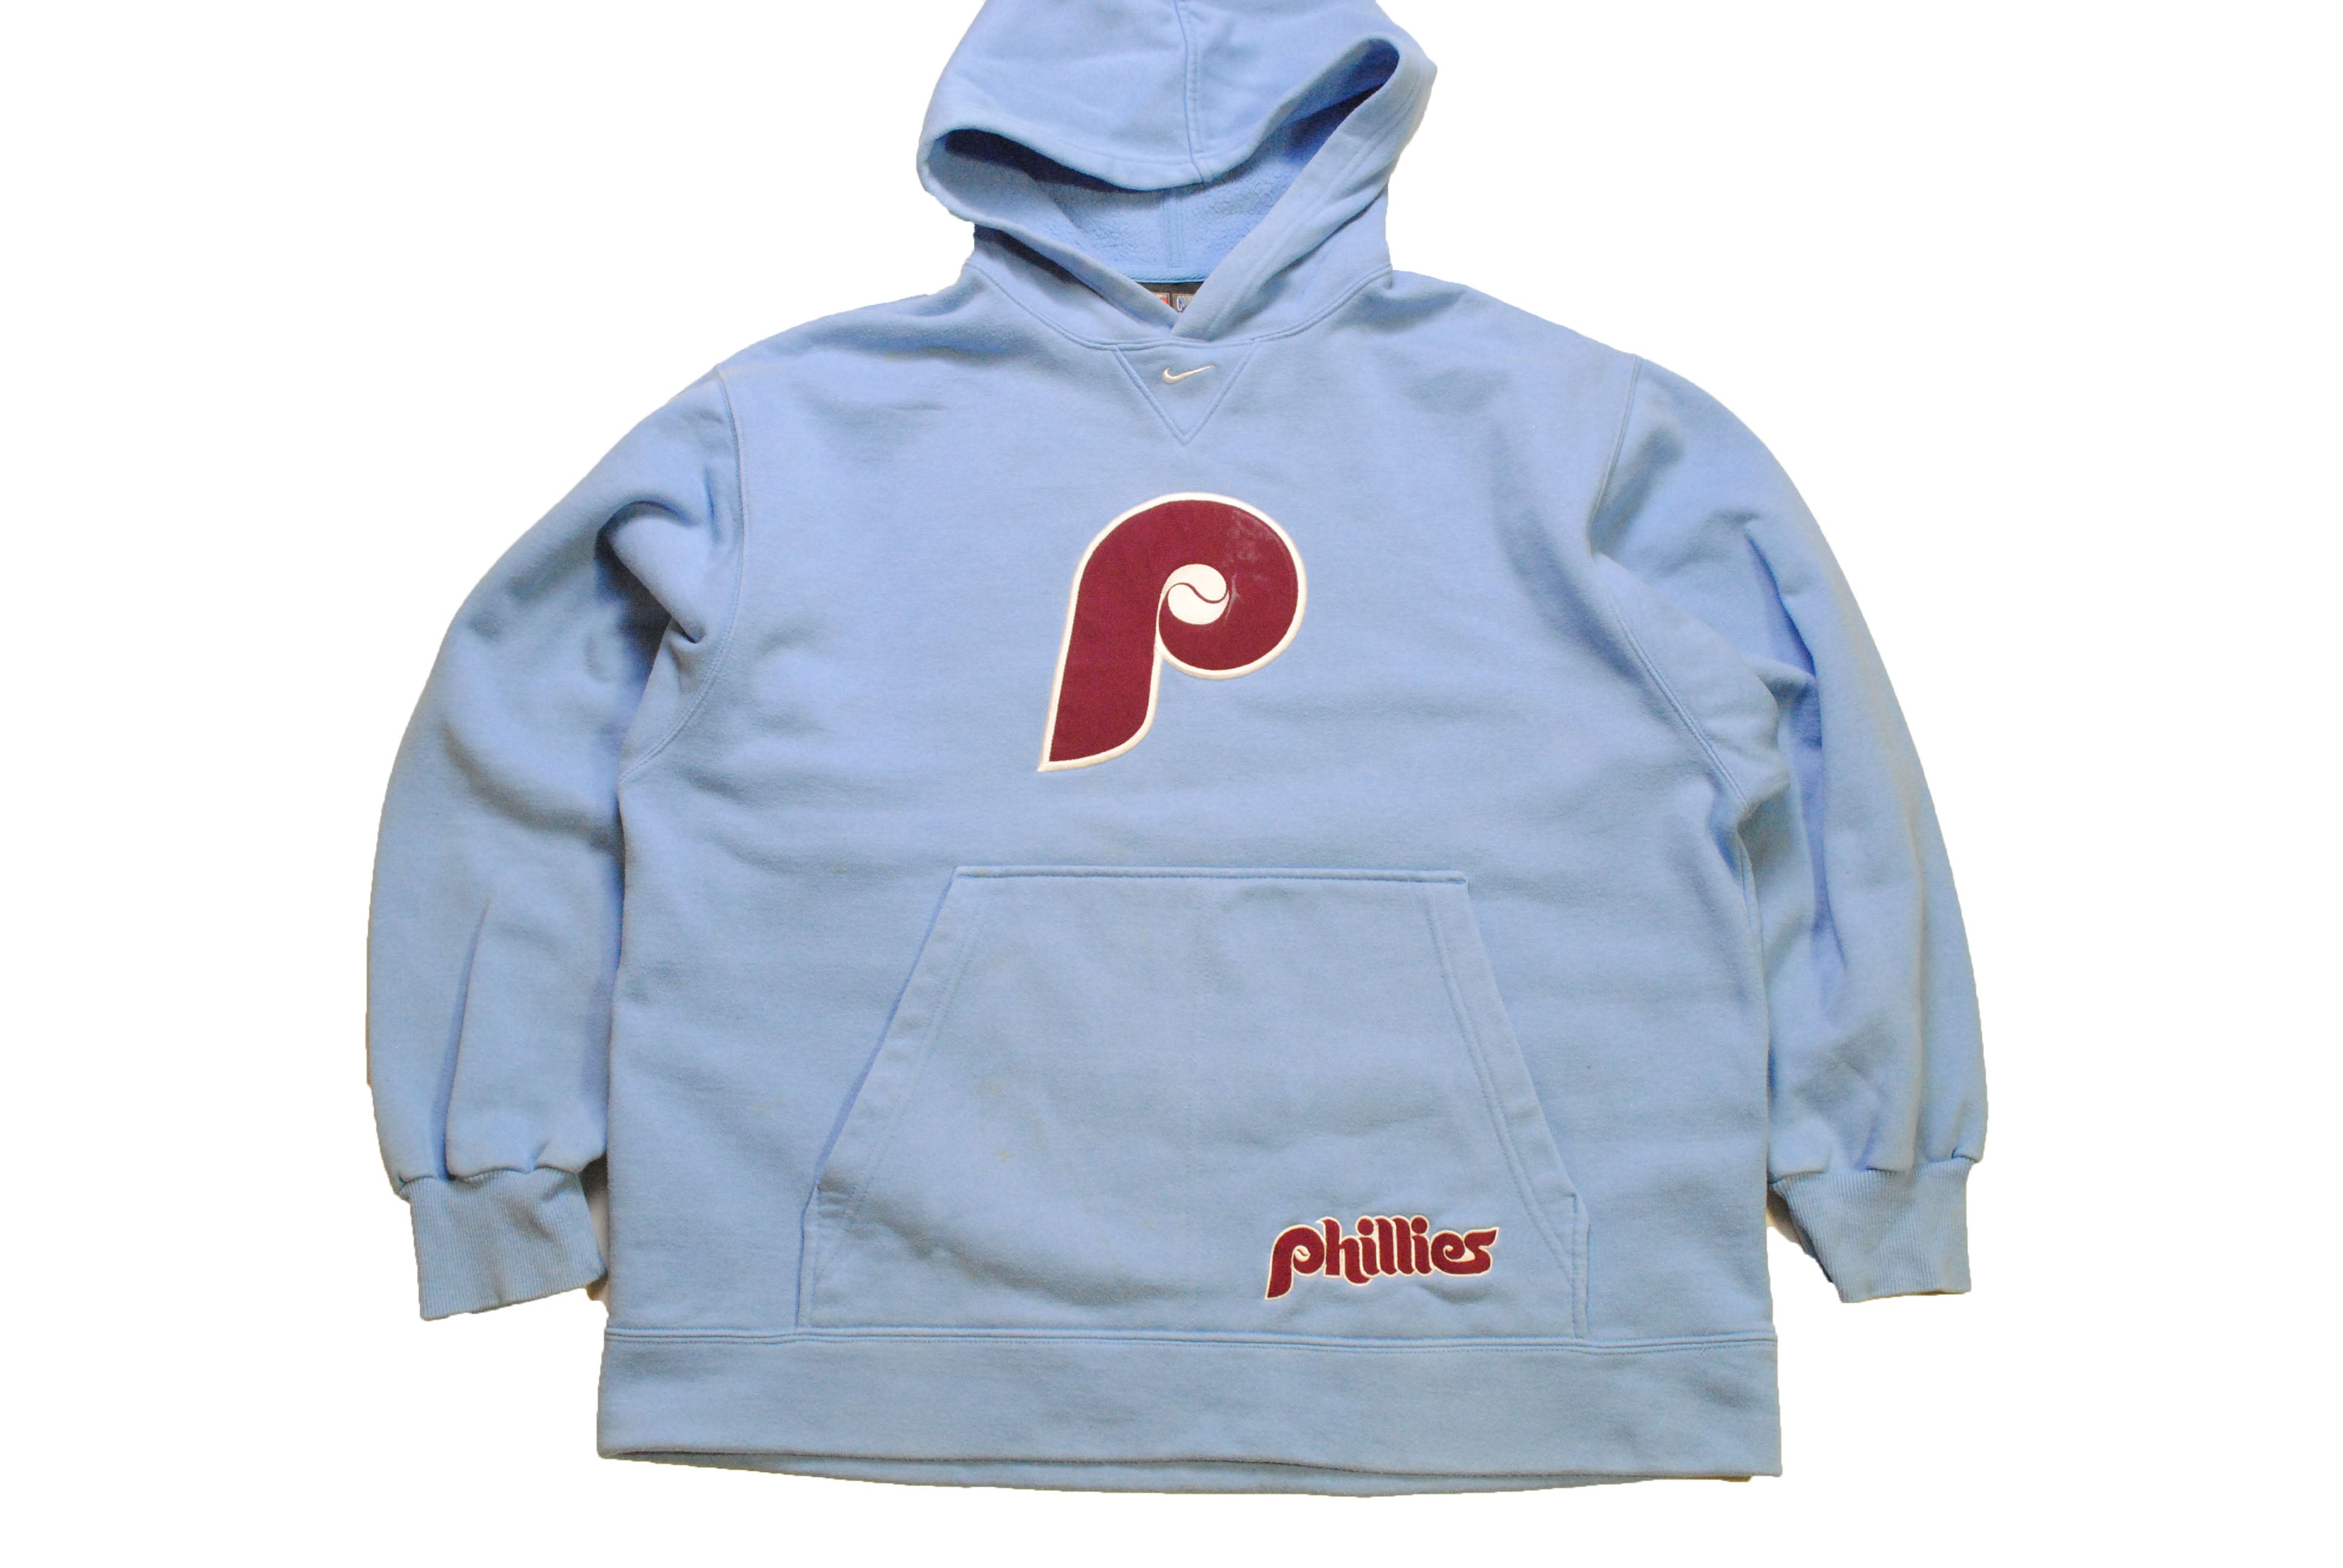 Nike Vintage Phillies Hoodie Gray Size XL - $20 - From Sydney